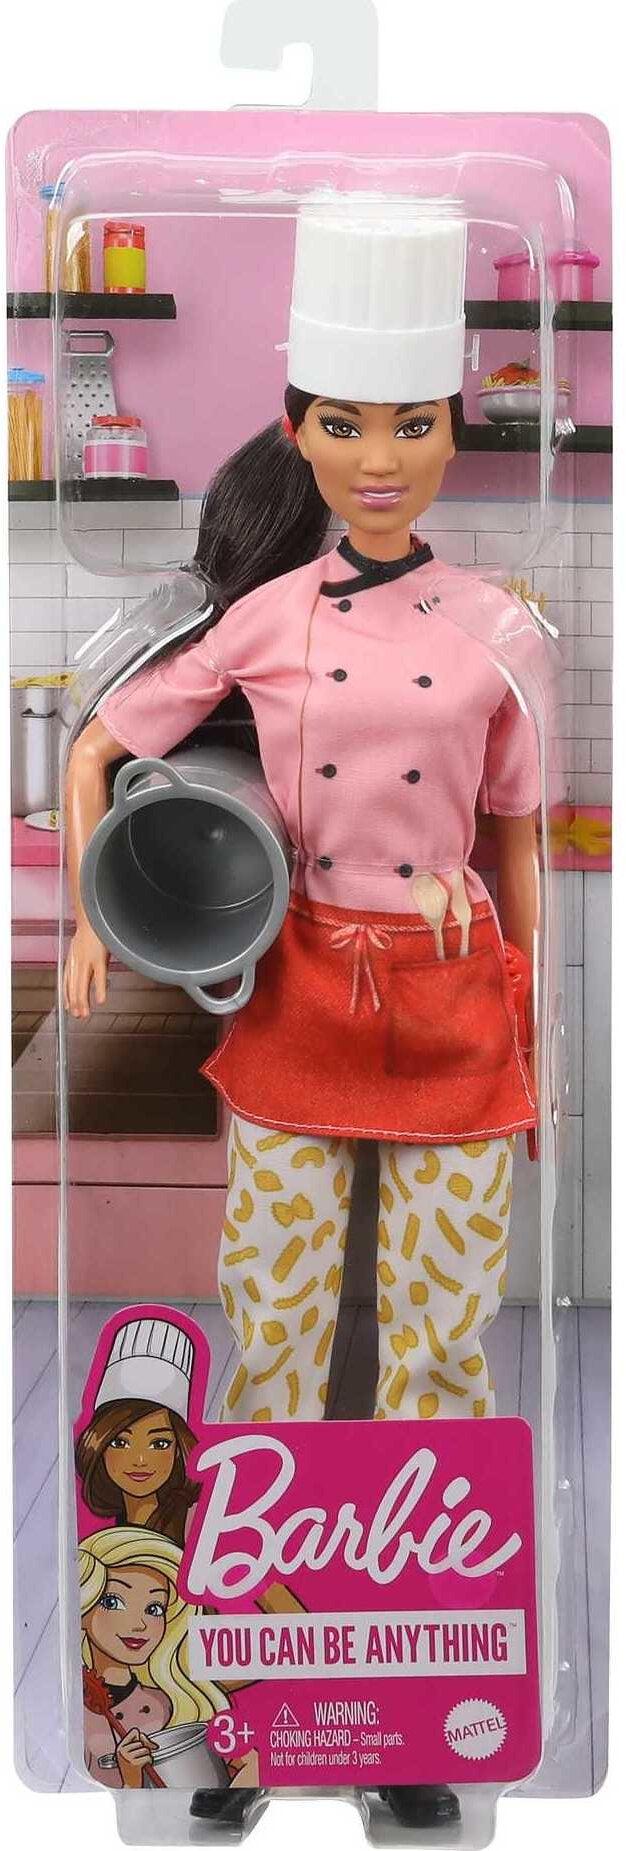 http://floridagifts.com/cdn/shop/files/barbie-pasta-chef-fashion-doll-brunette-with-white-hat-macaroni-pants-pot-and-pasta-accessories-33074855674040.jpg?v=1692813747